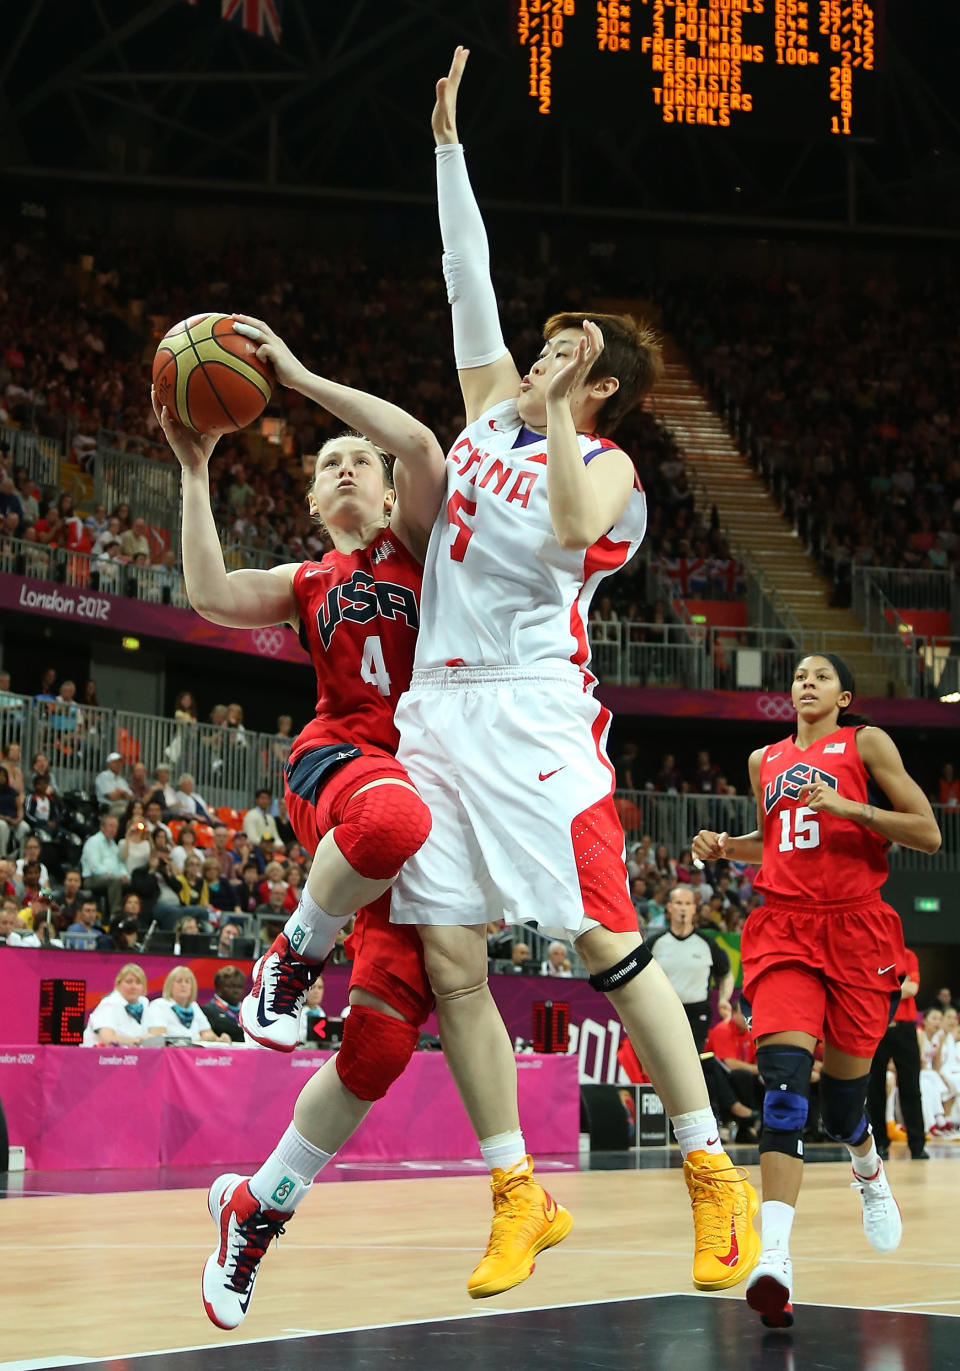 Lindsay Whalen #4 of United States drives to the basket against Yanyan Ji #6 of China during the Women's Basketball Preliminary Round match on Day 9 of the London 2012 Olympic Games at the Basketball Arena on August 5, 2012 in London, England. (Getty Images)